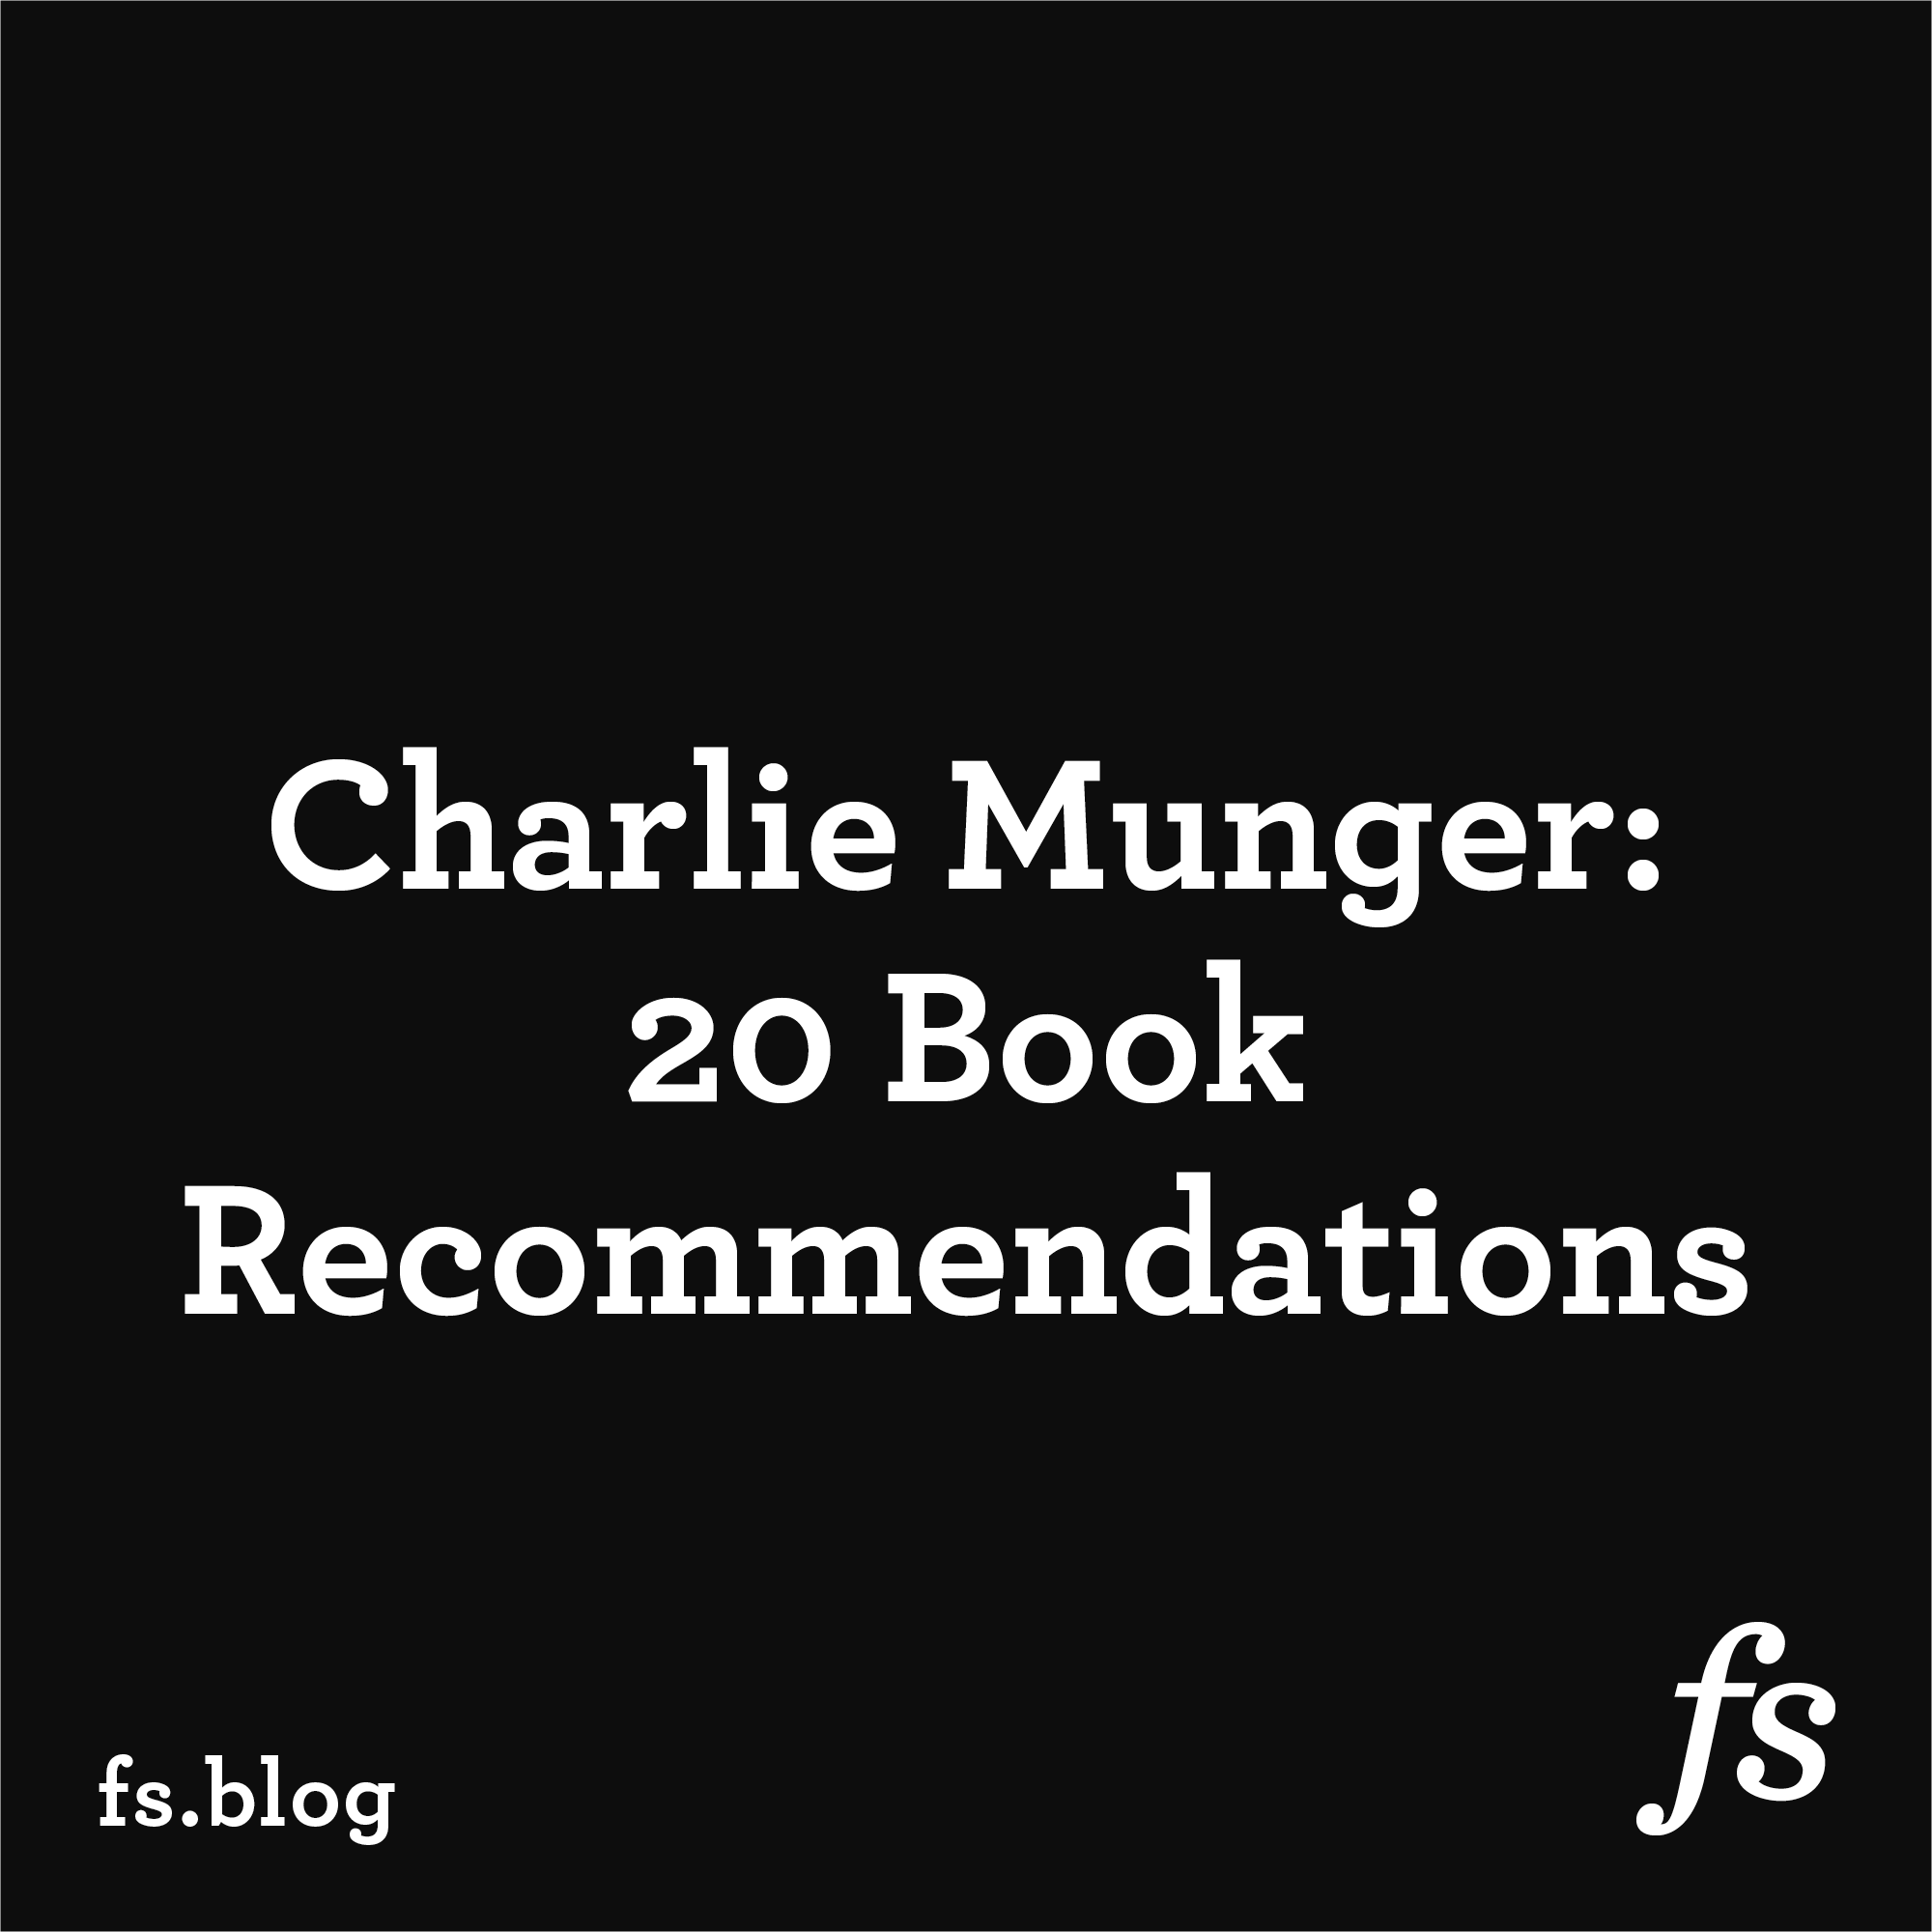 Charlie Munger: 20 Book Recommendations That will Make you Smarter